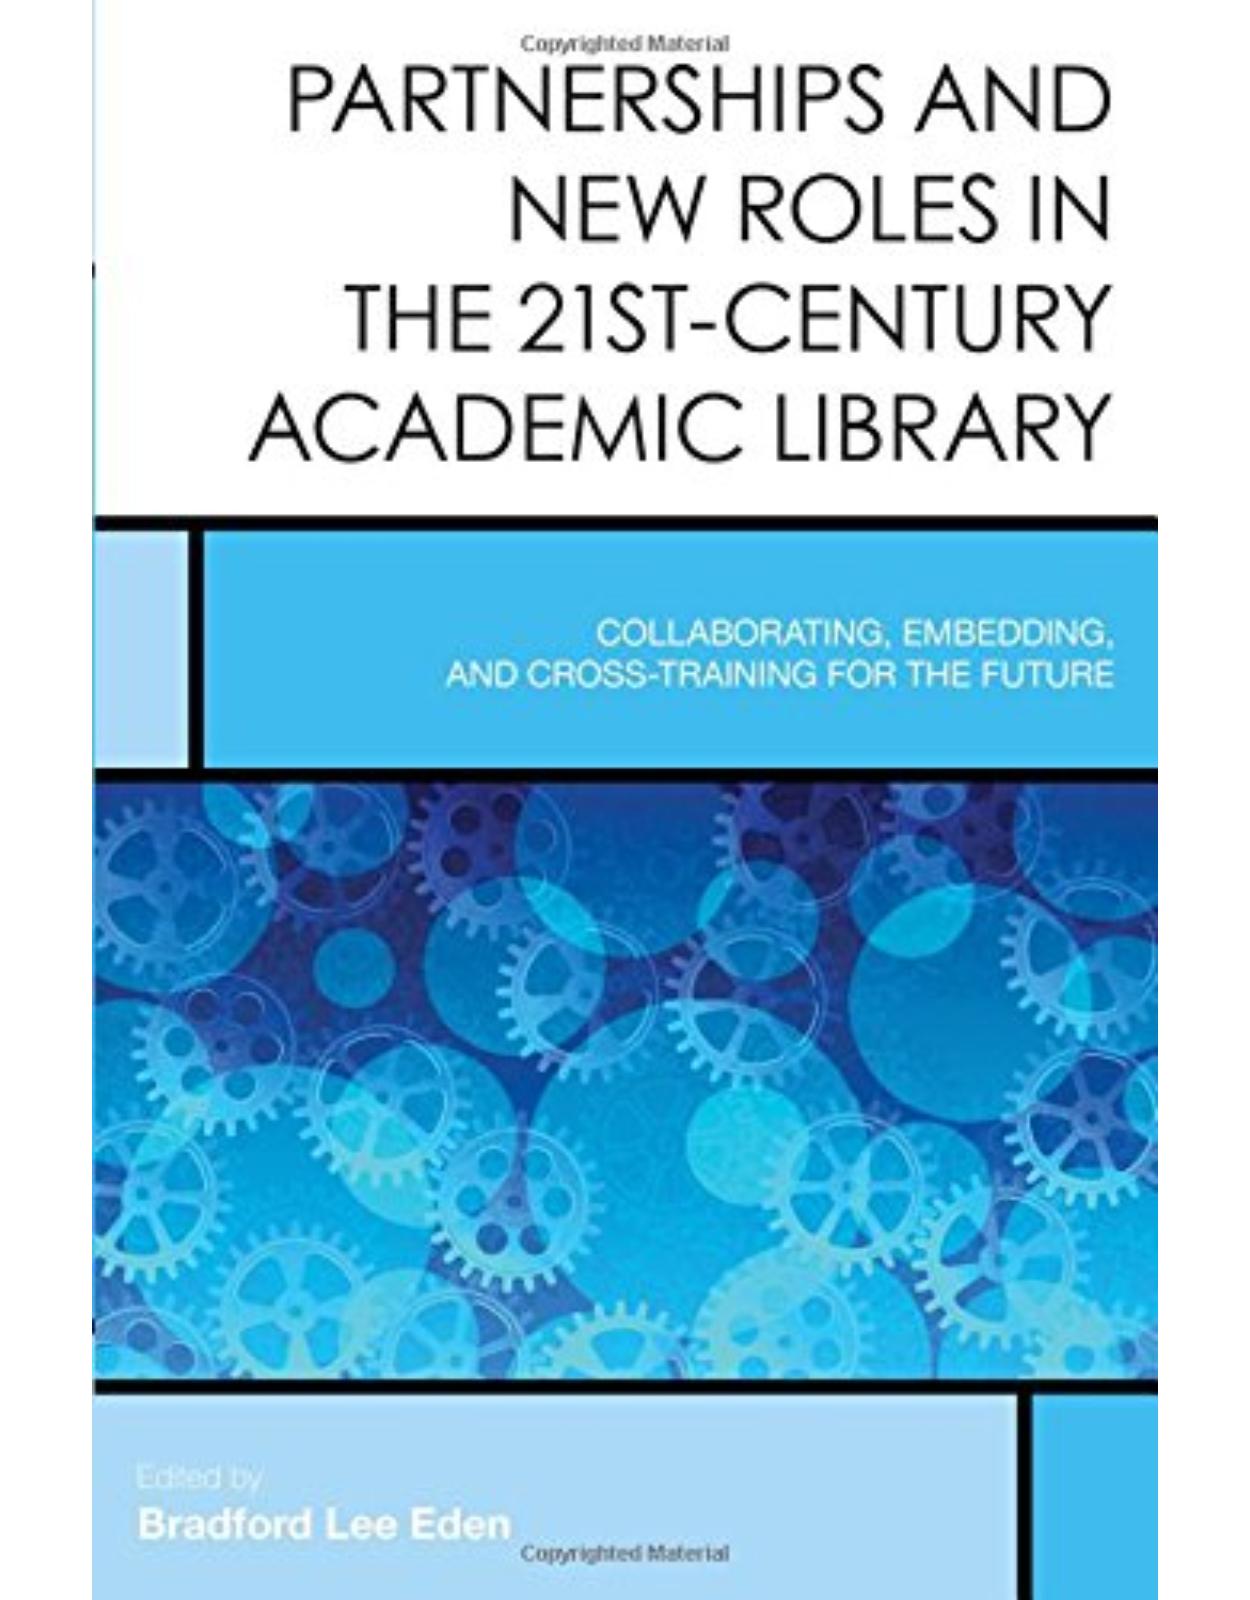 Partnerships and New Roles in the 21st-Century Academic Library  Collaborating, Embedding, and Cross-Training for the Future